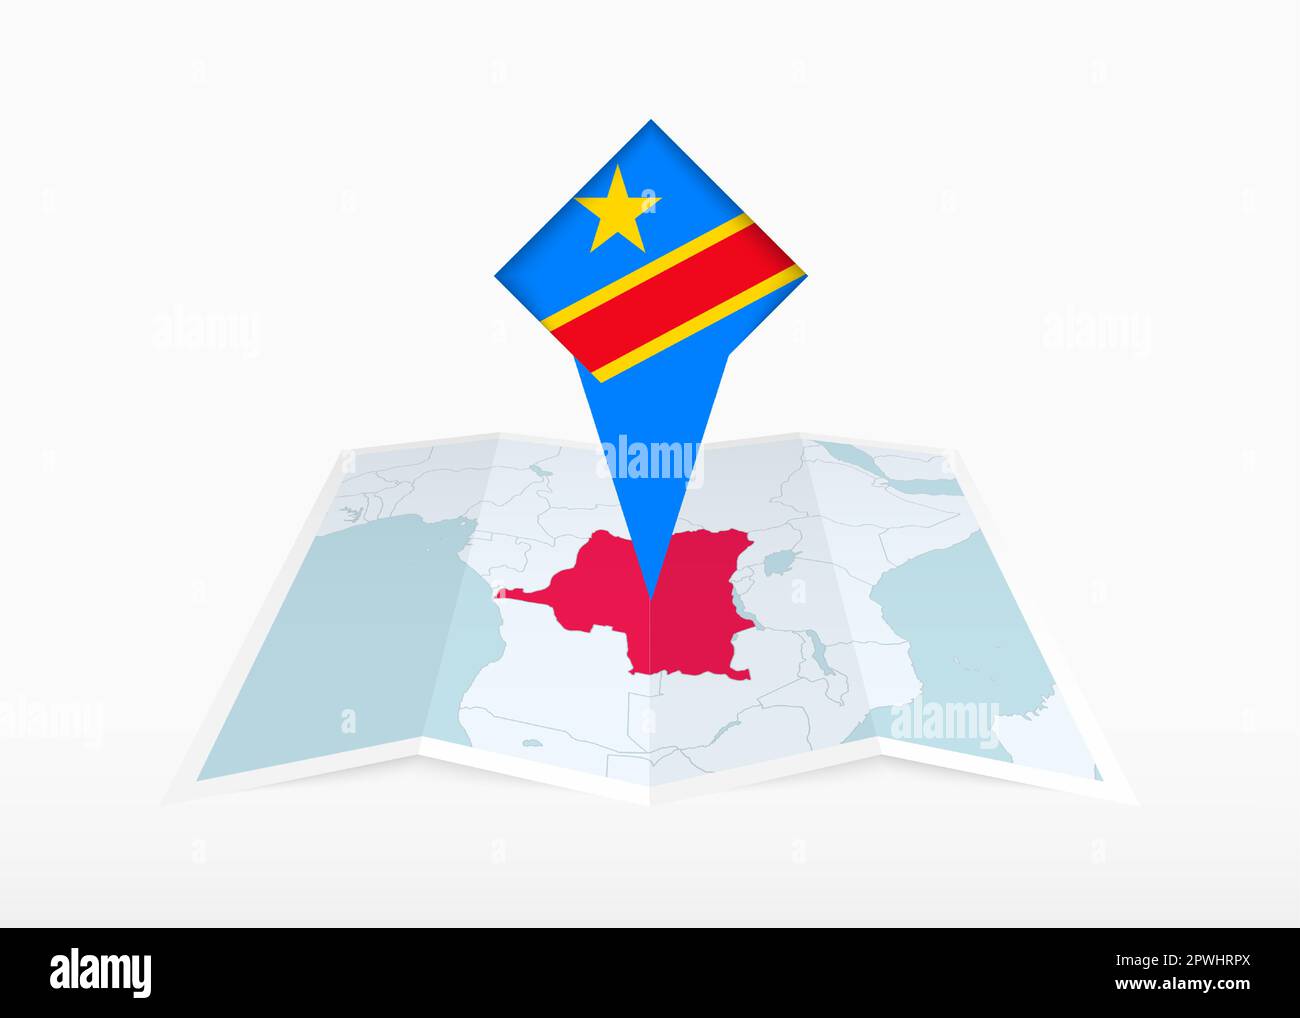 DR Congo is depicted on a folded paper map and pinned location marker with flag of DR Congo. Folded vector map. Stock Vector